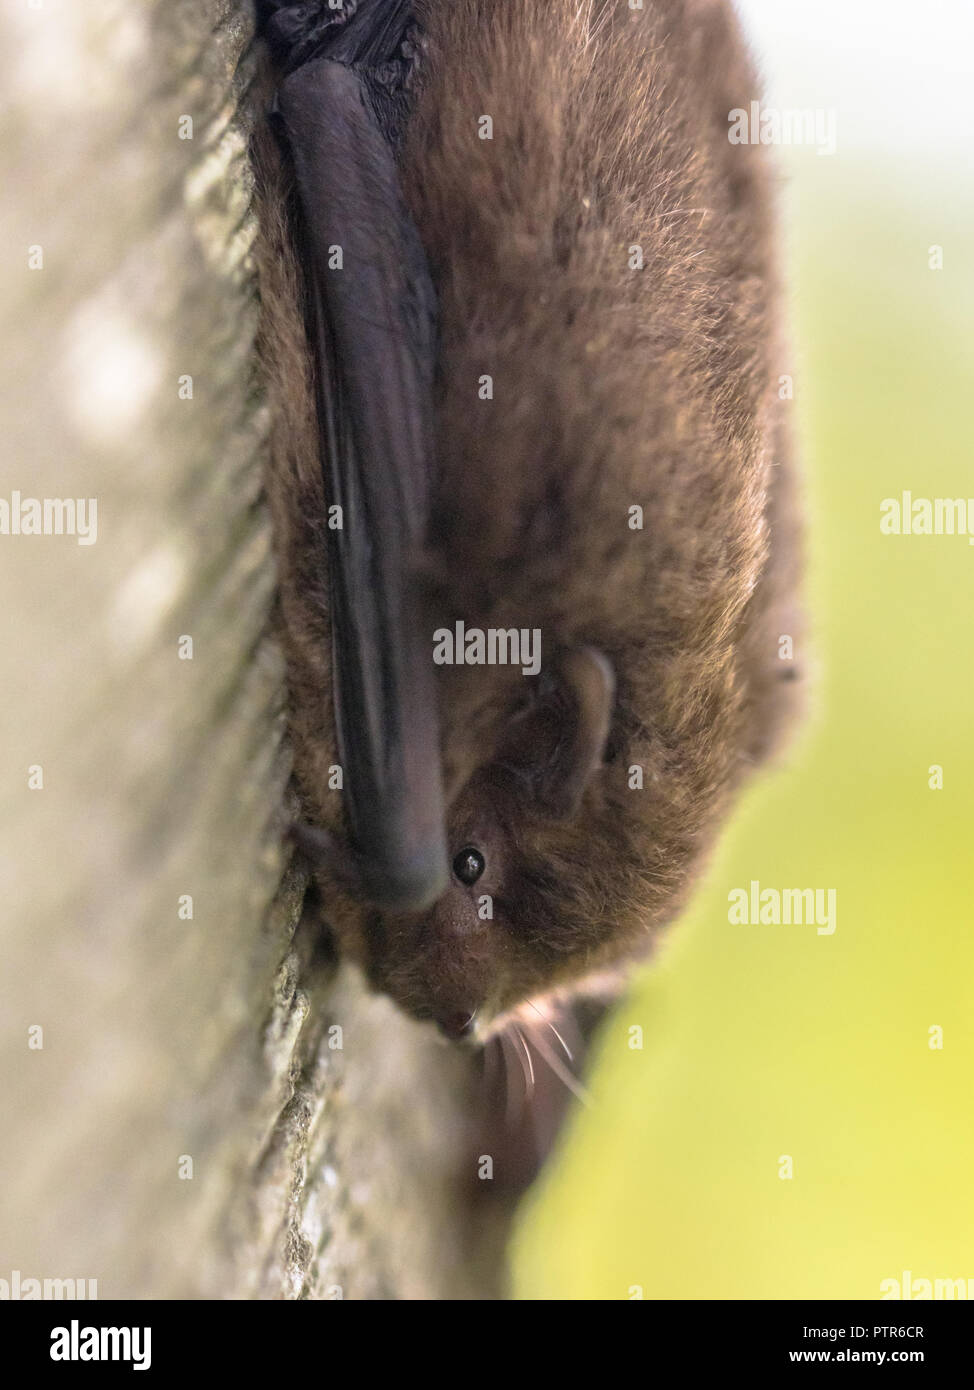 Nathusius' pipistrelle (Pipistrellus nathusii) resting on tree. This is a small migratory bat in the pipstrelle genus. Large flocks travel from northe Stock Photo